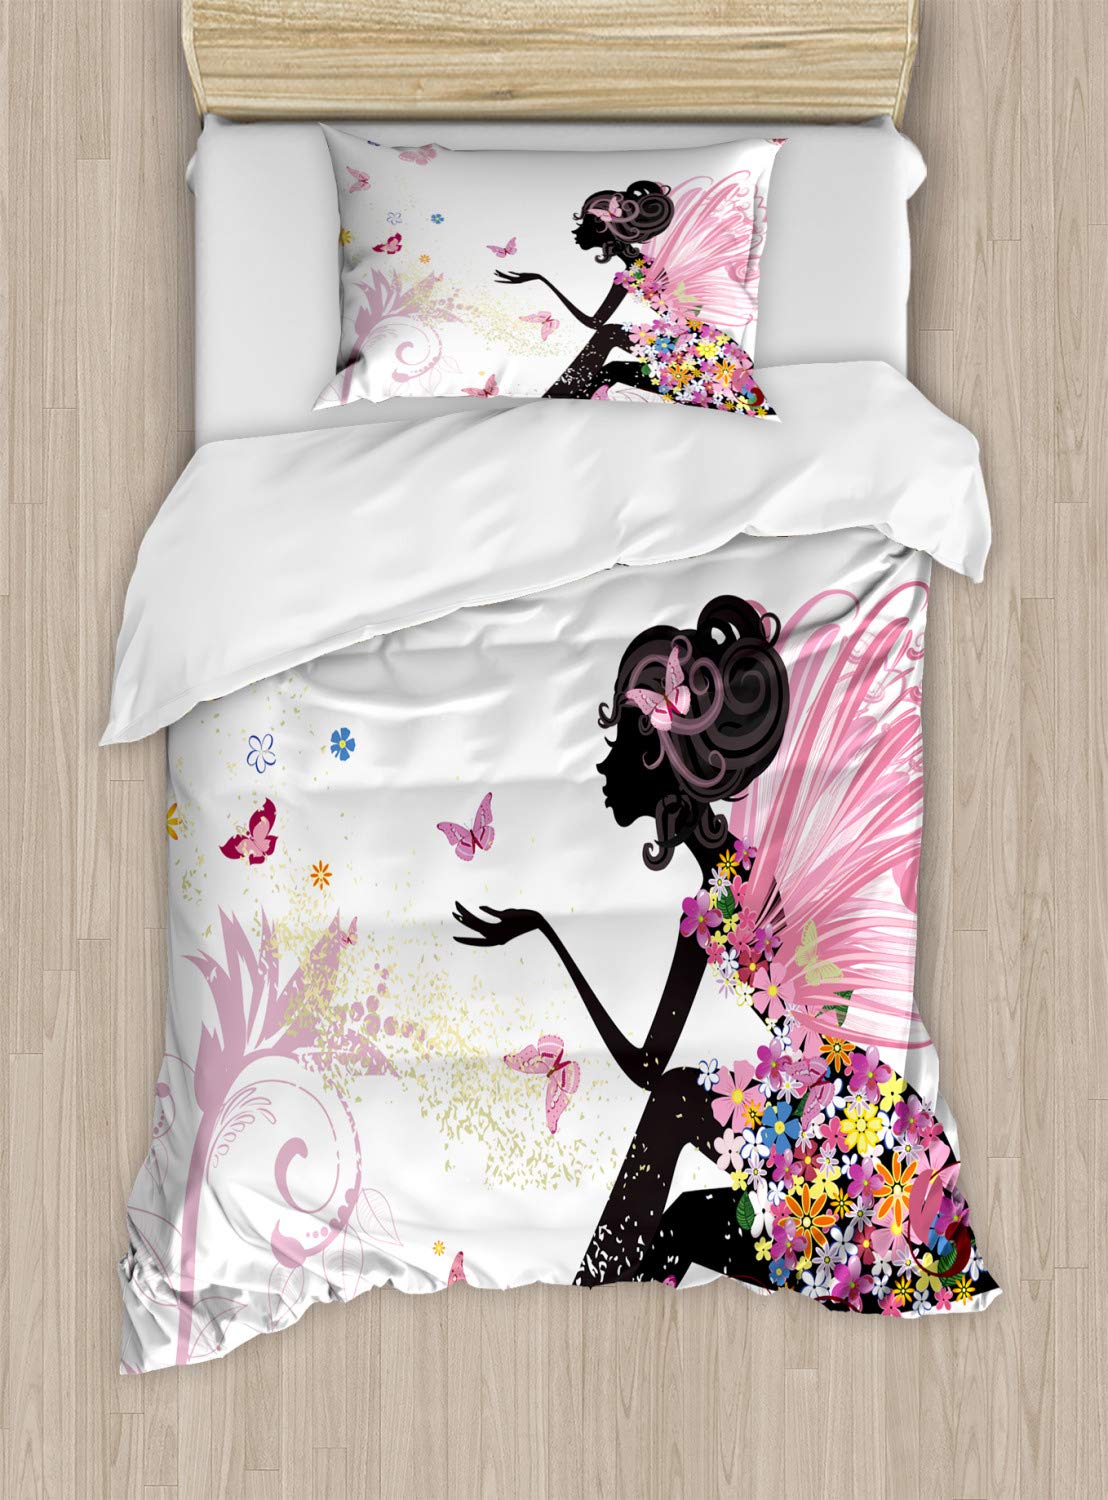 Fairy Girl with Wings Bedding (Twin)